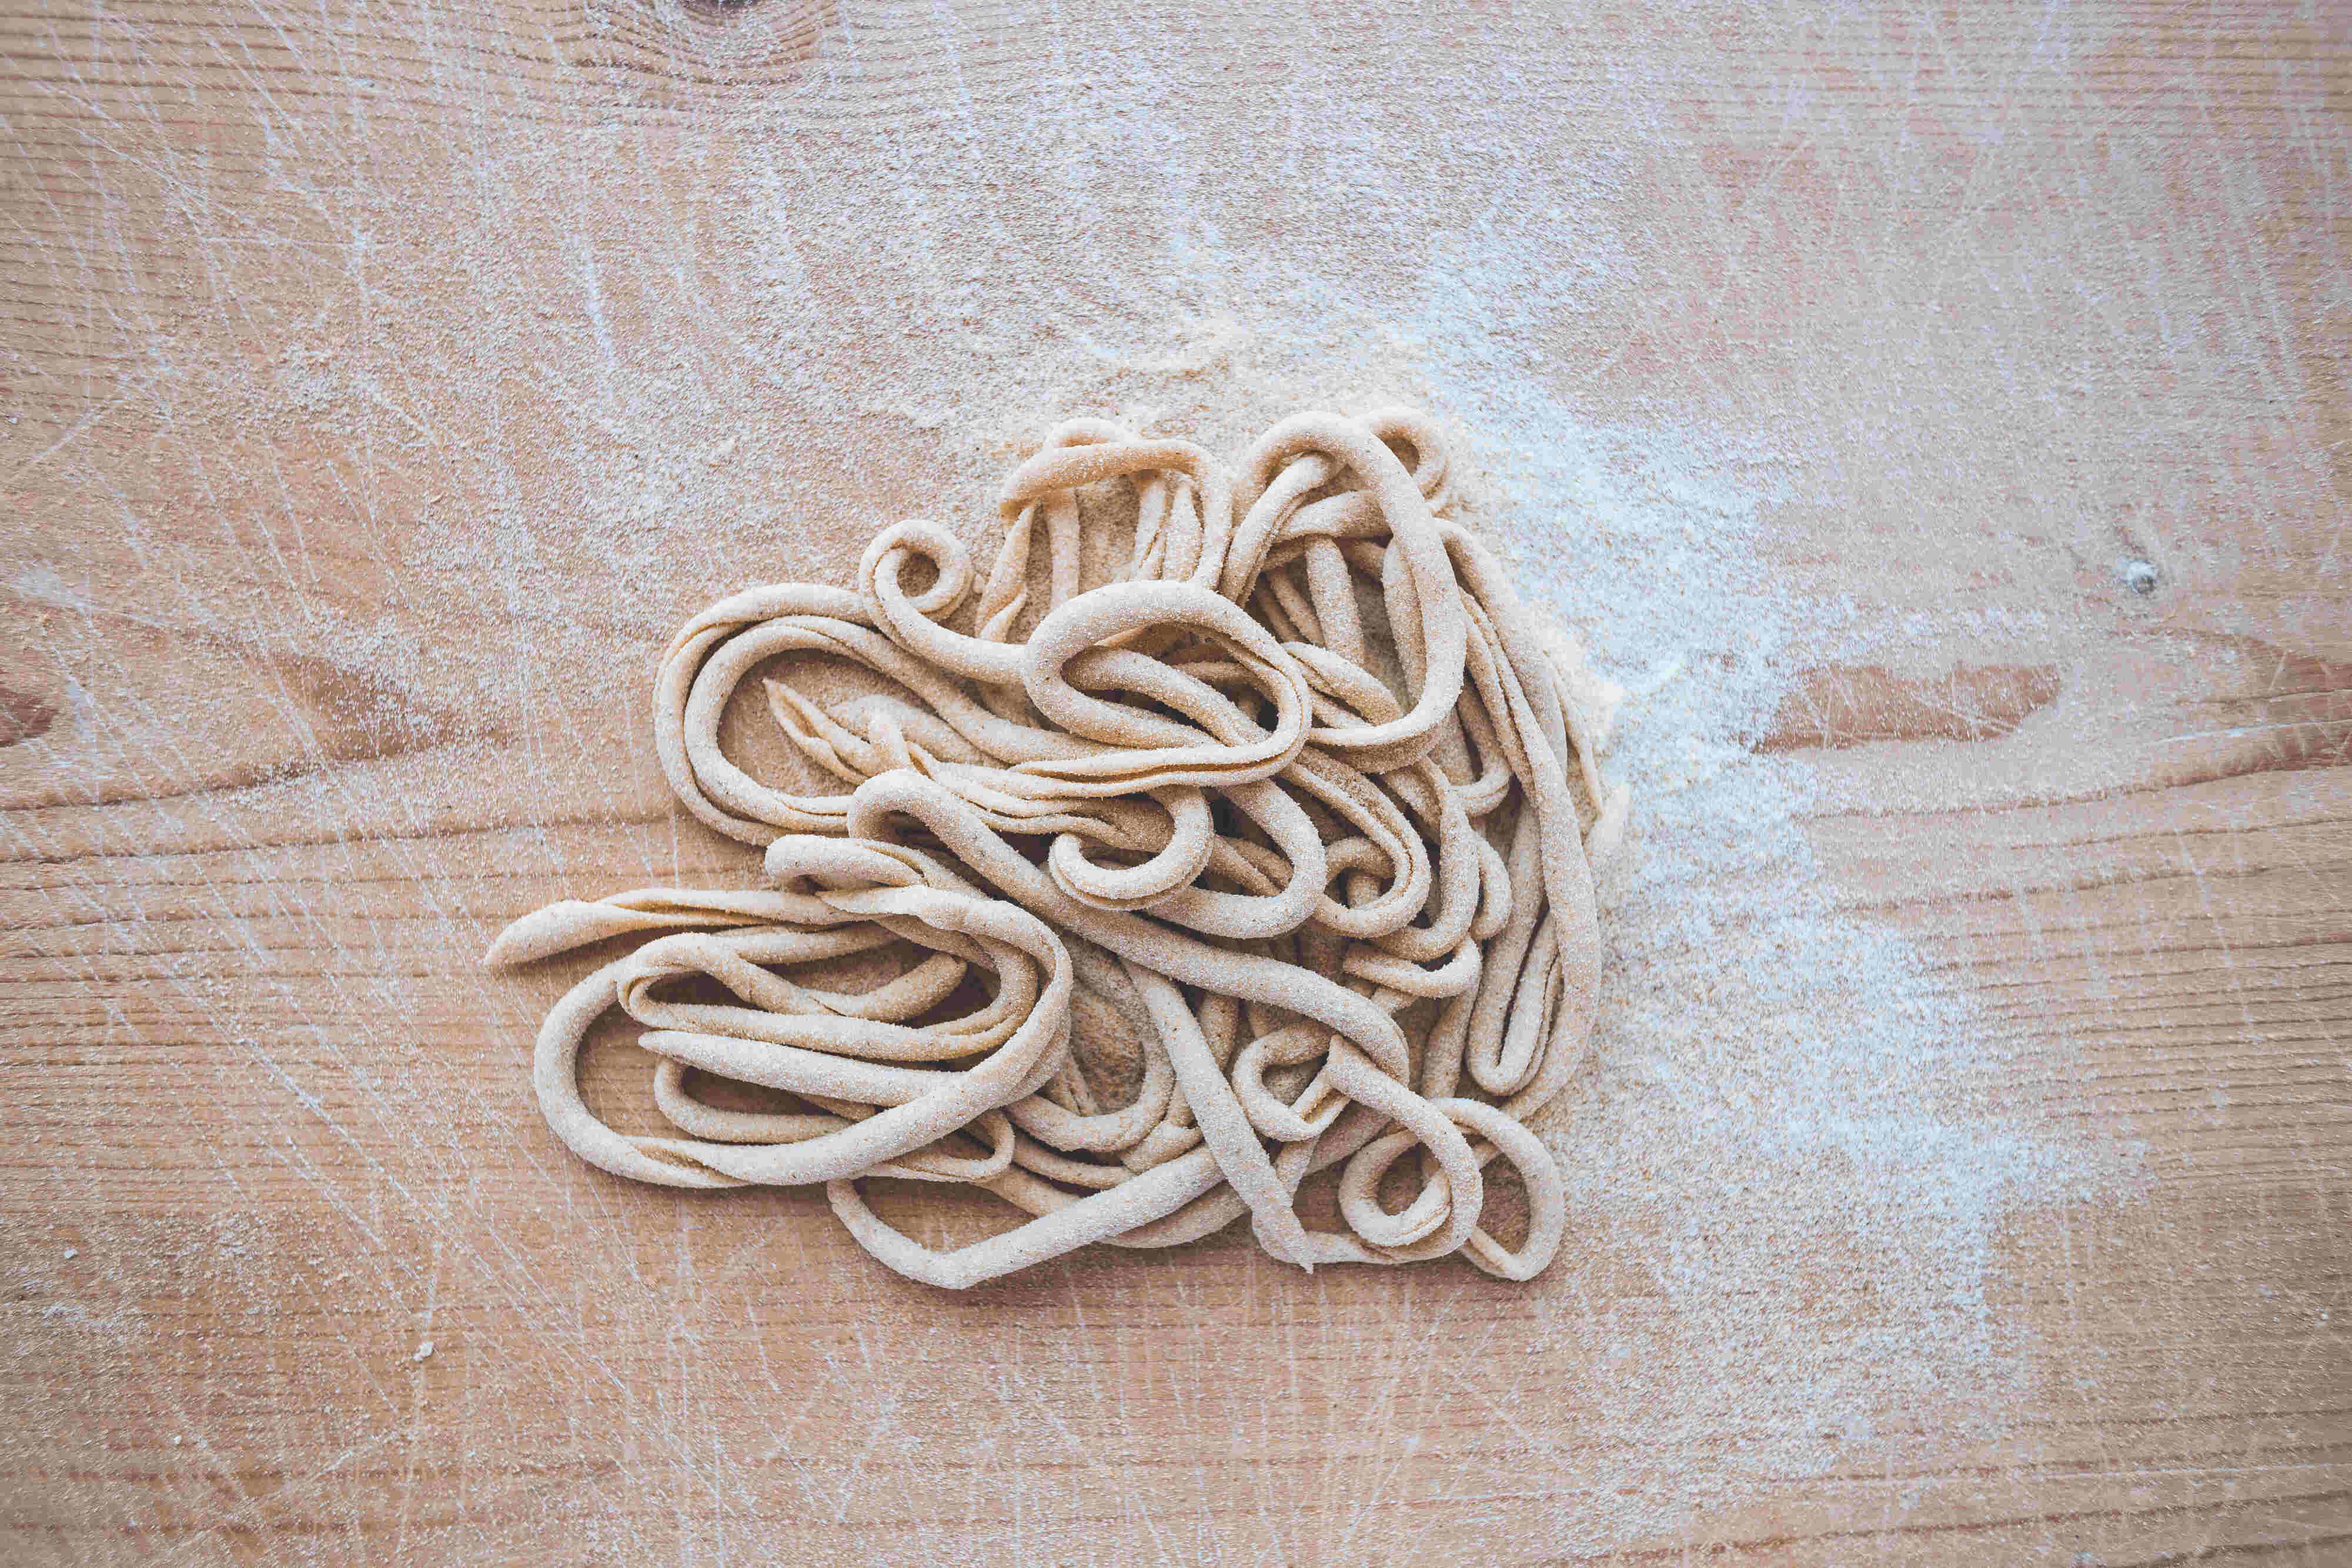 Satisfy everyone’s food craving whenever these pasta photos appear!